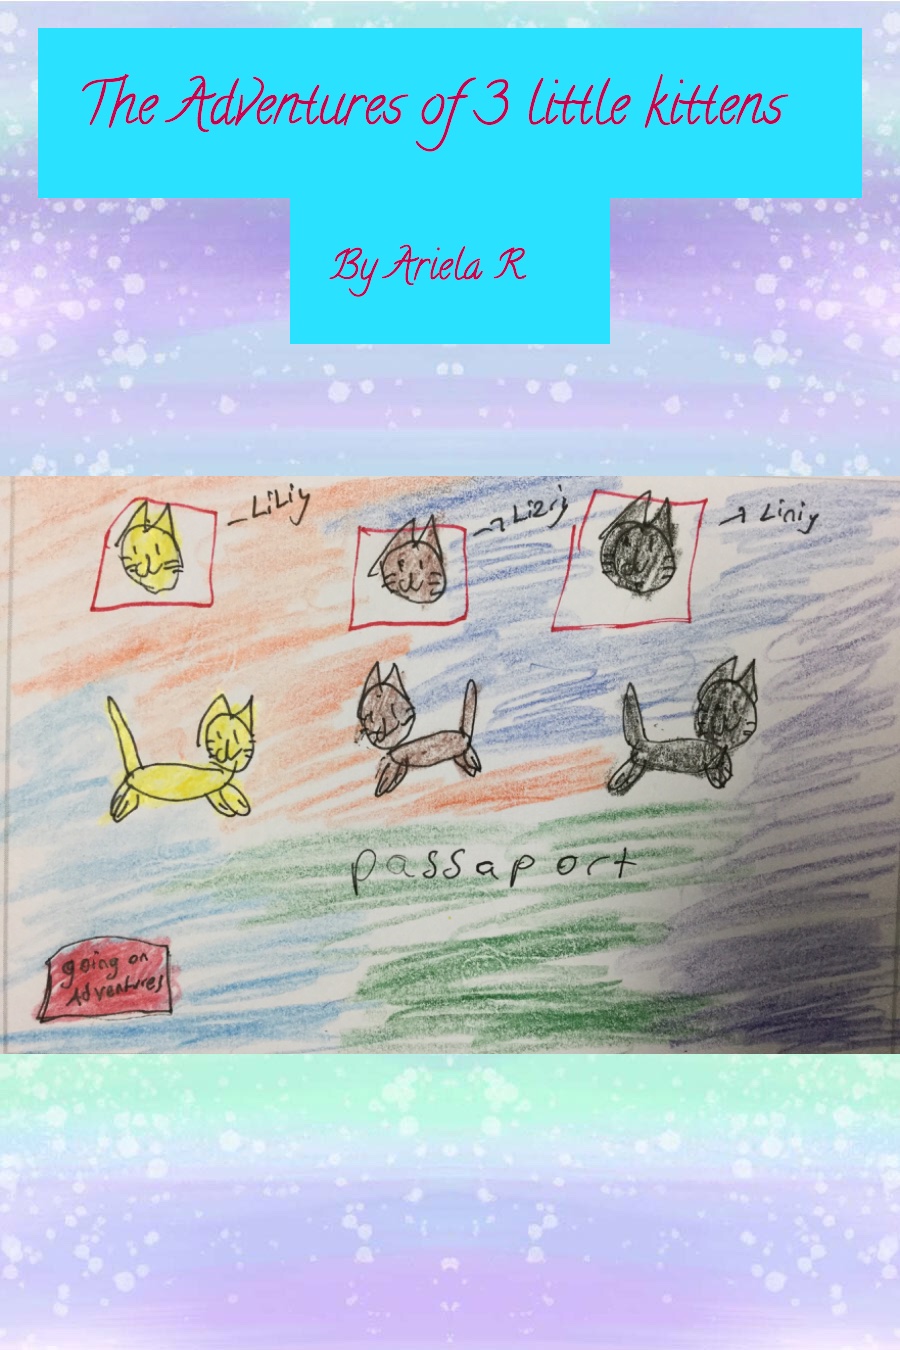 The Adventures of 3 Little Kittens by Ariela R